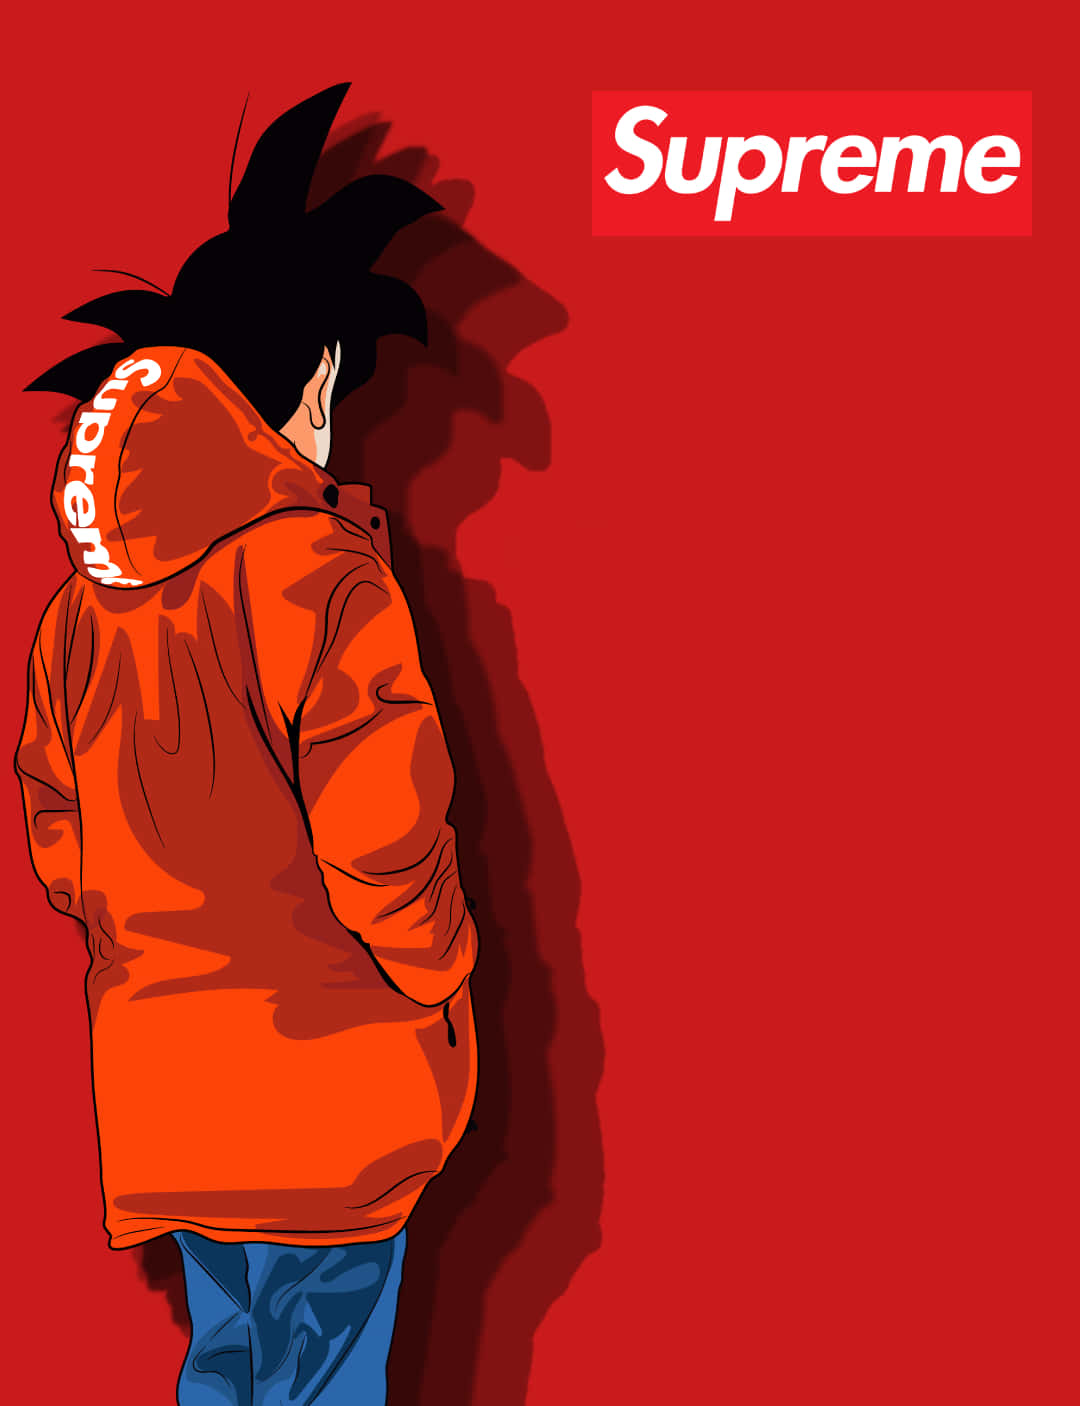 The Supremely Powerful Goku Wallpaper